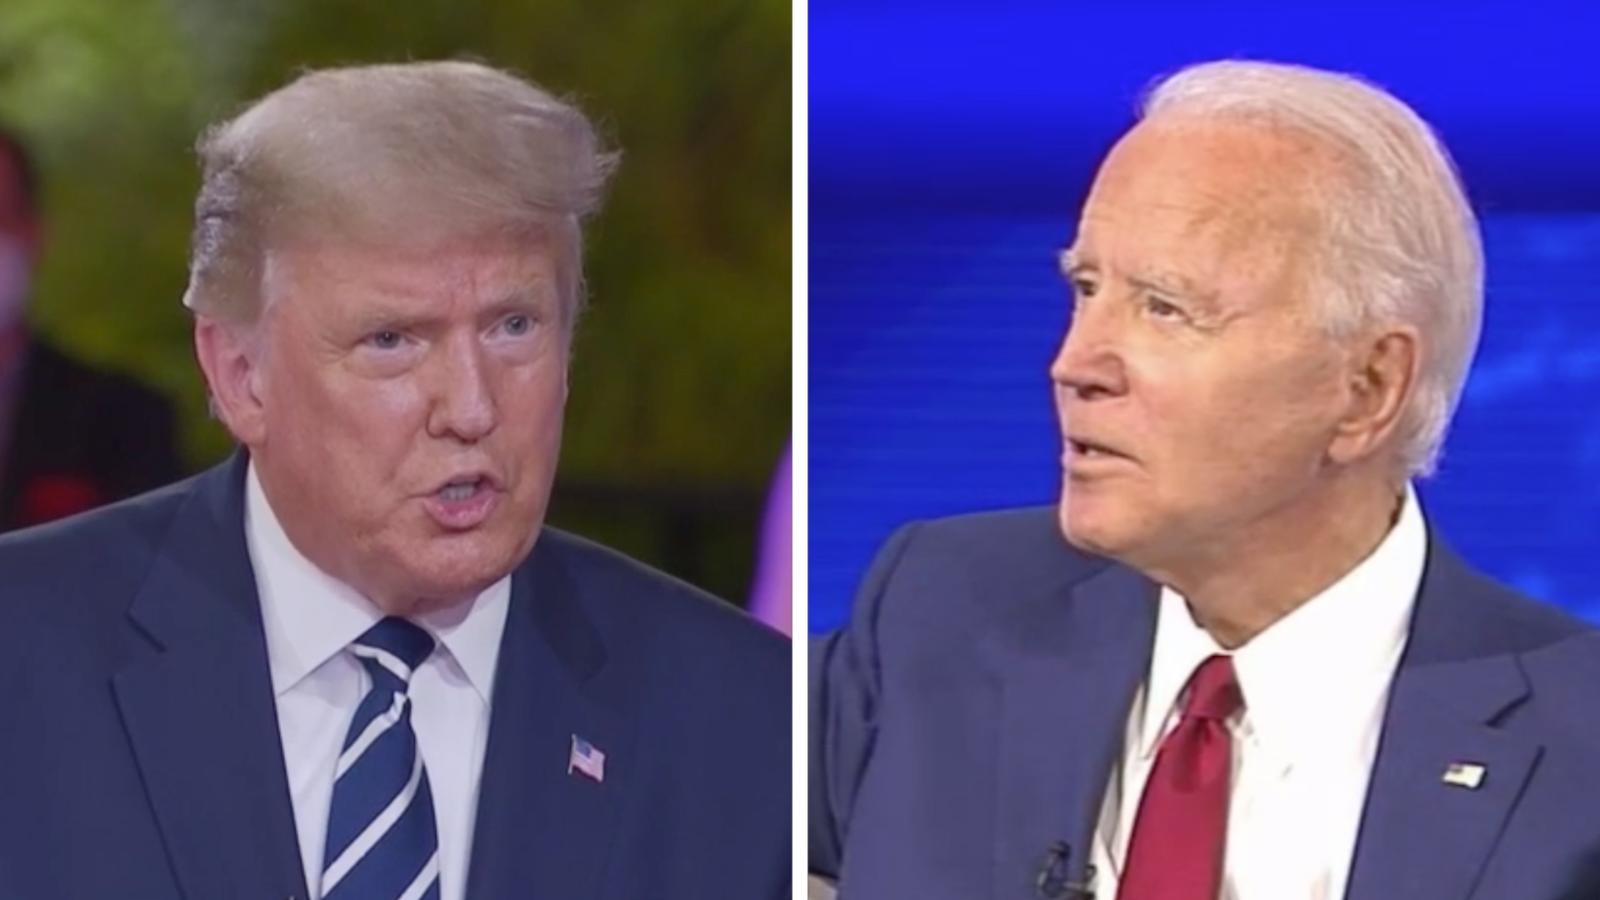 Town Hall Ratings More People Watched Biden On Abc Than Trump On Nbc Msnbc And Cnbc Cnn